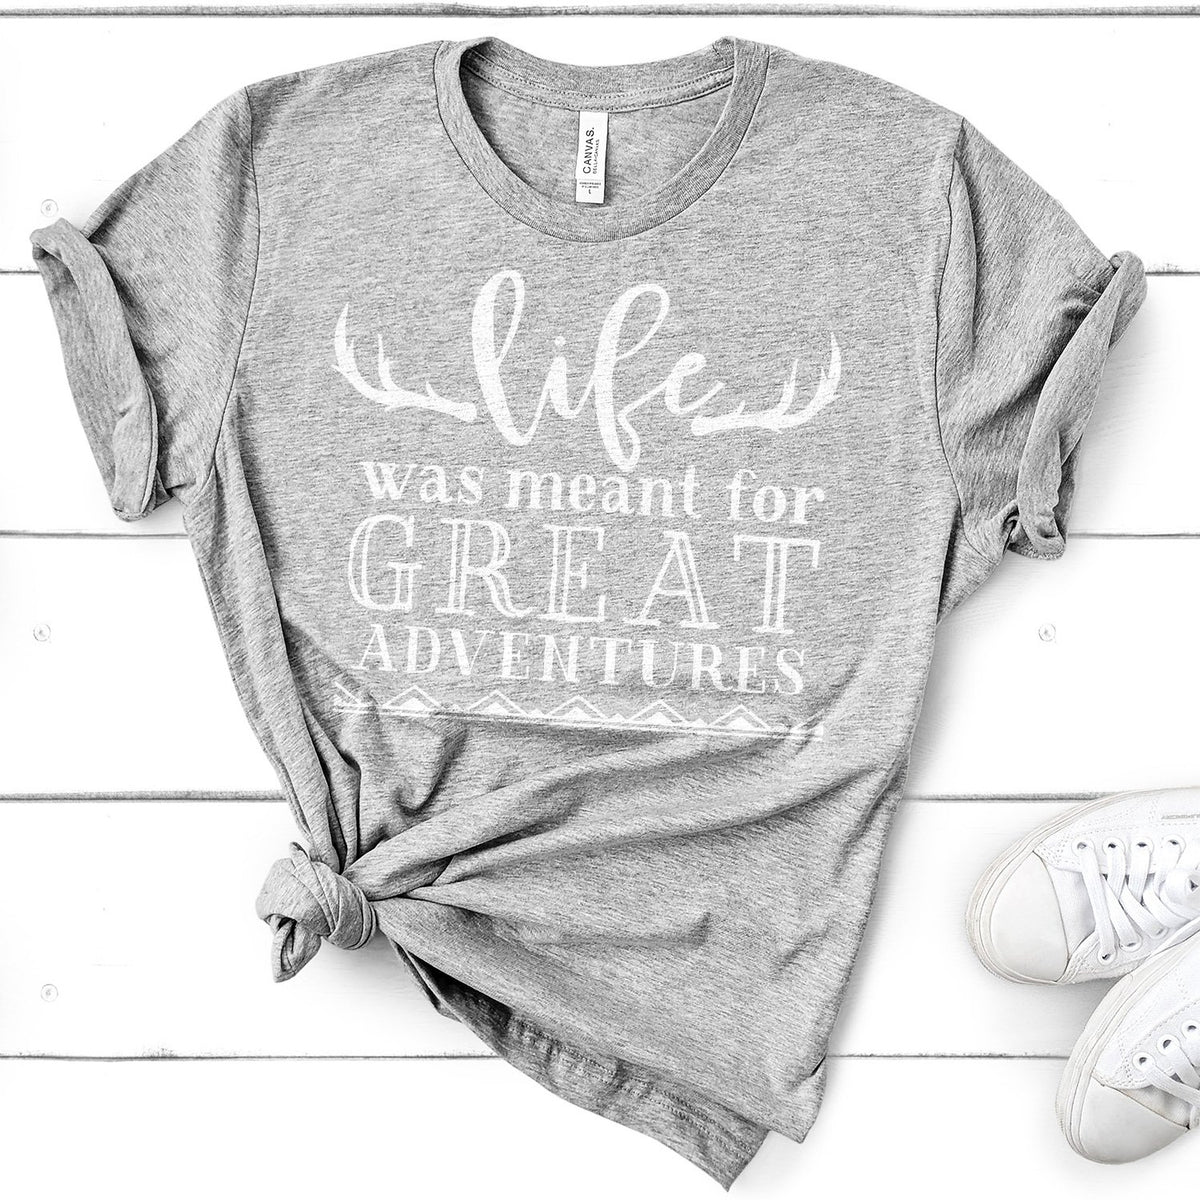 Life Was Meant For Great Adventure - Short Sleeve Tee Shirt